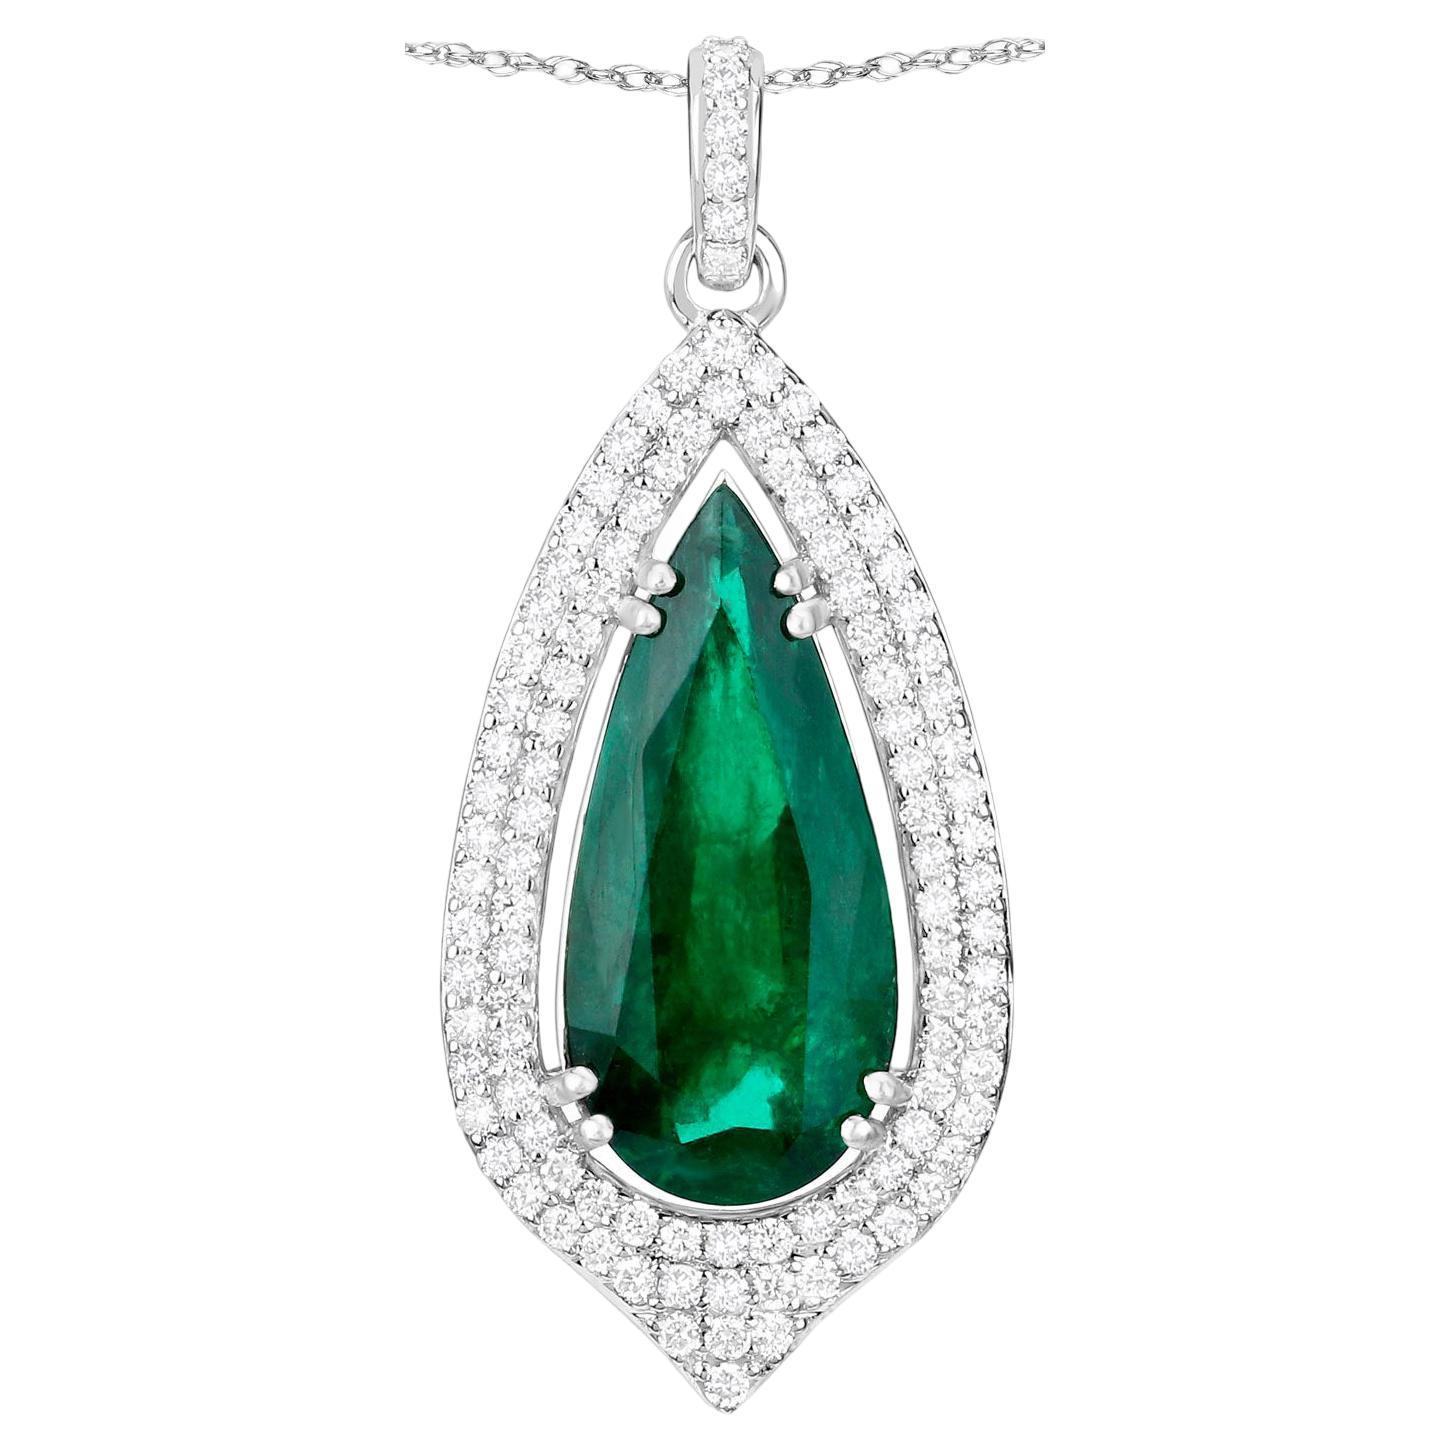 IGI Certified Zambian Emerald Necklace With Diamonds 5.37 Carats 14K White Gold For Sale